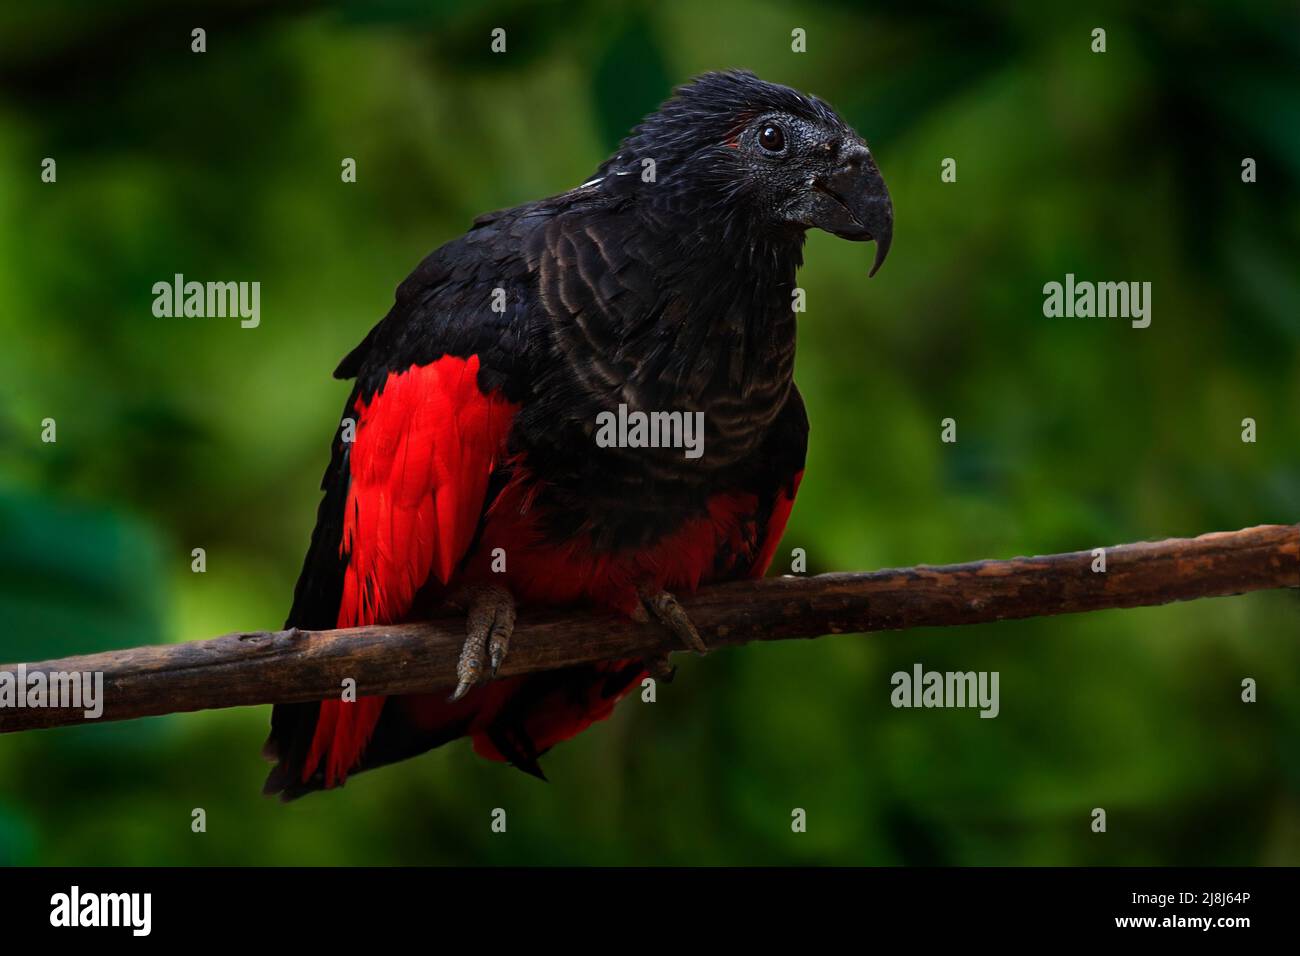 Pesquet´s parrot, Psittrichas fulgidus, rare bird from New Guinea. ugly red and black parrot in the nature habitat, dark green forest. Wildlife scene Stock Photo